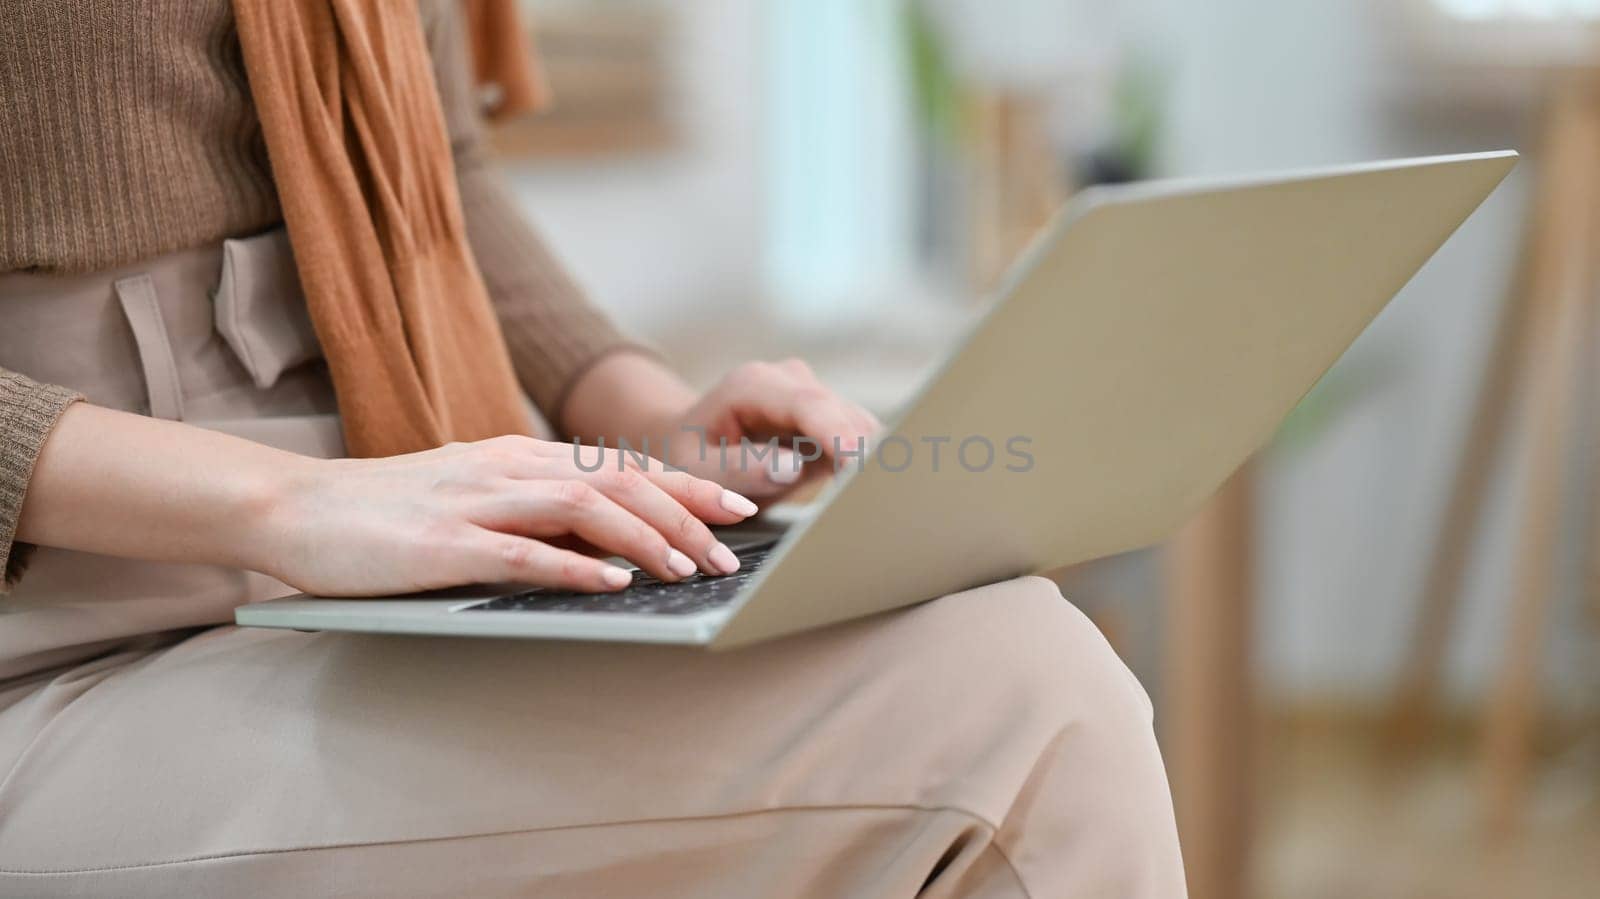 Cropped image of woman hands typing on laptop computer, studying remotely or browsing internet by prathanchorruangsak